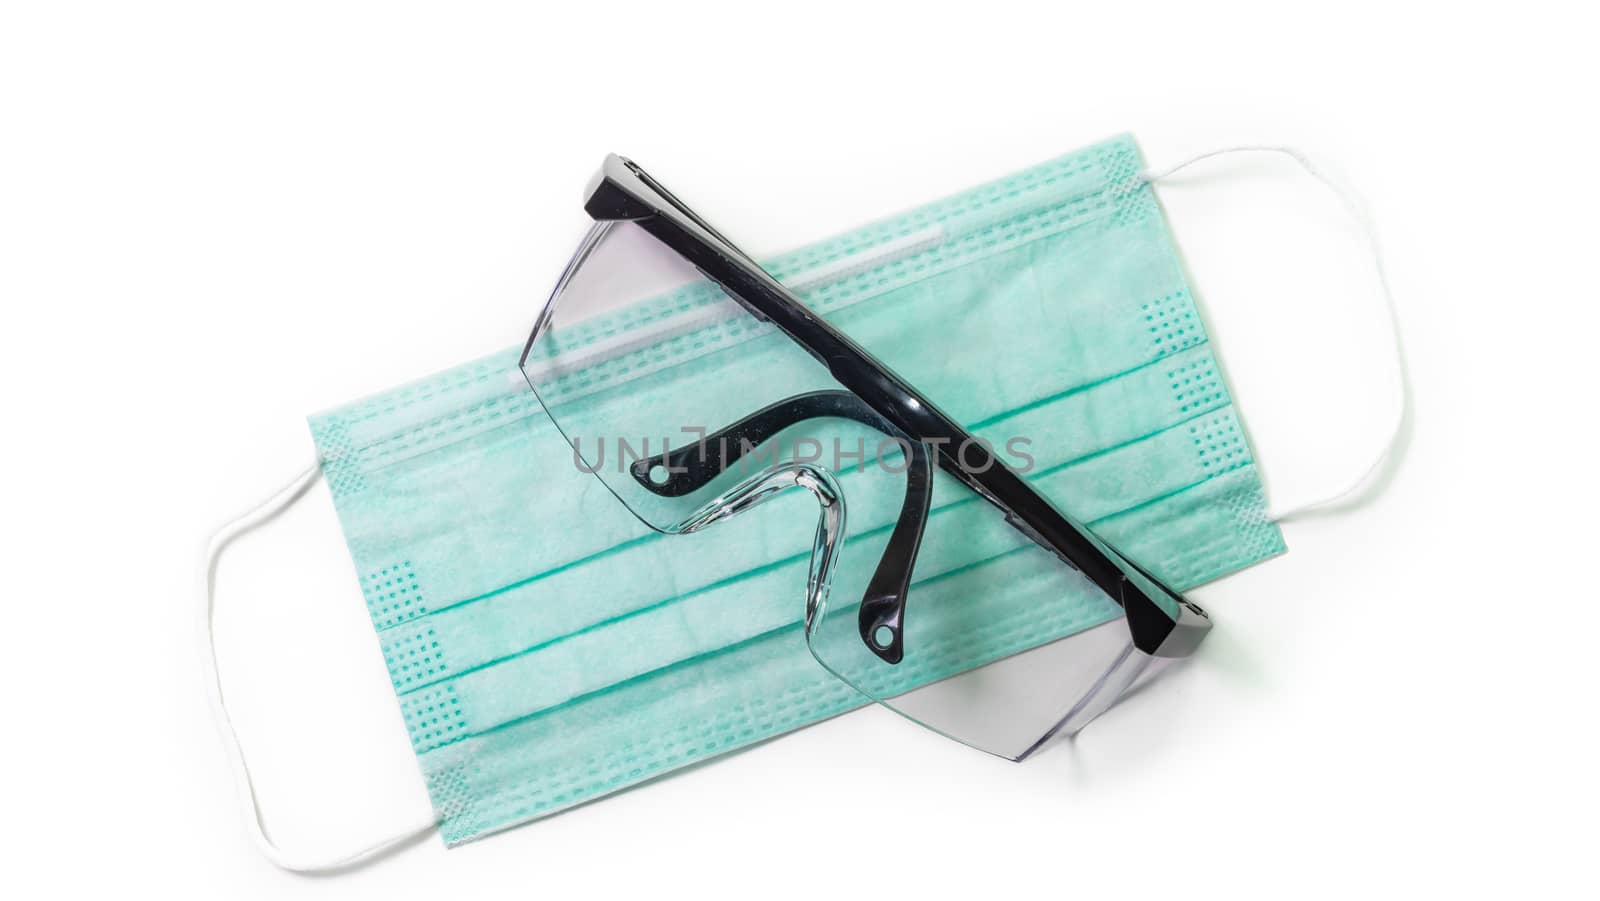 The close up of Anti-viral protection mask and Eye protection glasses on white background.